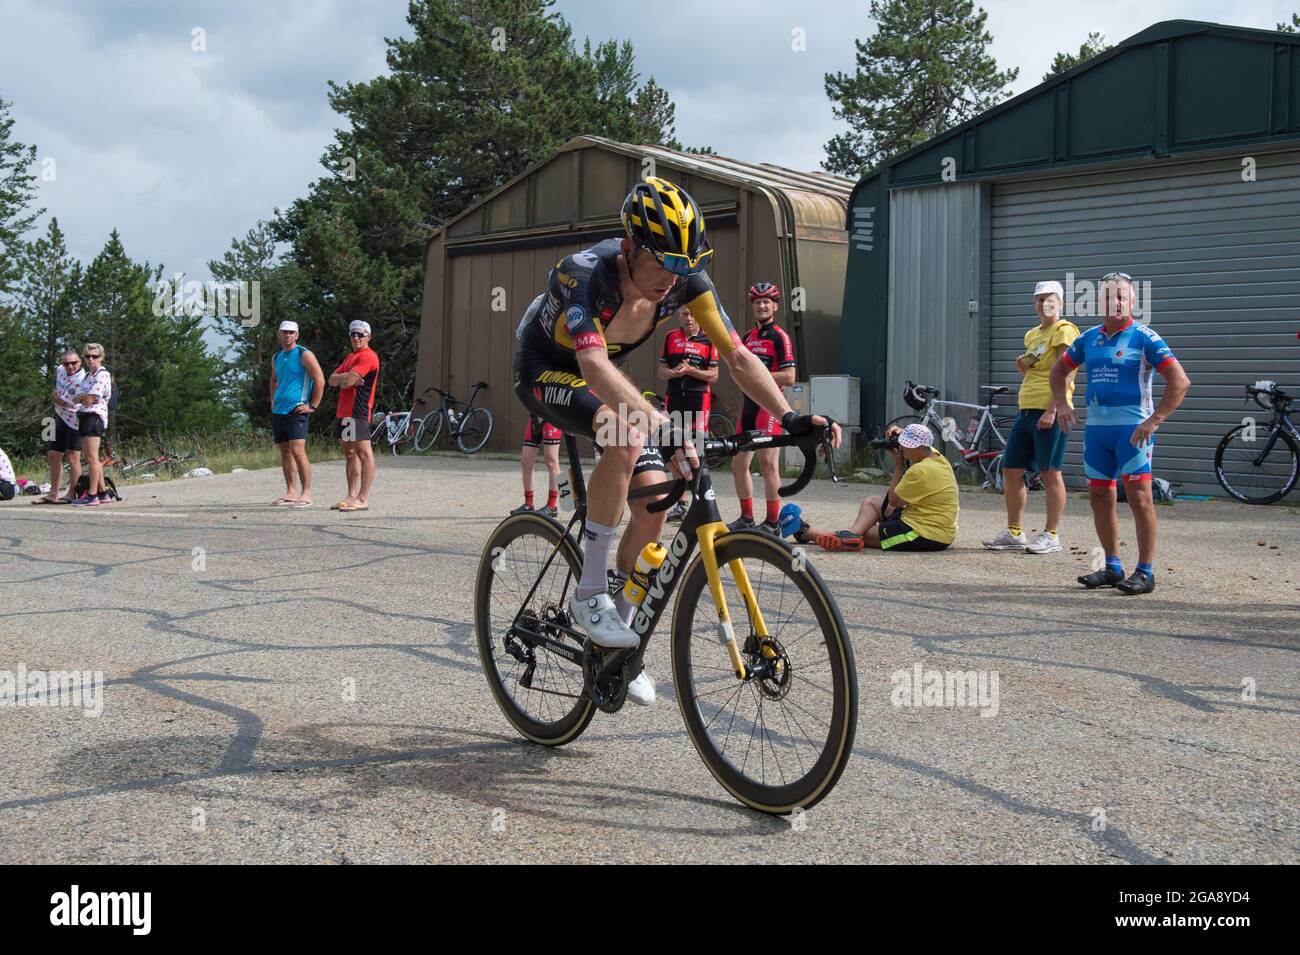 Malaucene, France. 07th July, 2021. Steven kruijswijk in action during the second climb of Mont-Ventoux in Tour de France 2021. He ranked 21 of the stage.The 11th stage of the Tour de France 2021 takes place between Sorgues and Malaucene with a double ascent of the Mont-Ventoux. Winner of the stage is Wout Van Aert. (Photo by Laurent Coust/SOPA Images/Sipa USA) Credit: Sipa USA/Alamy Live News Stock Photo